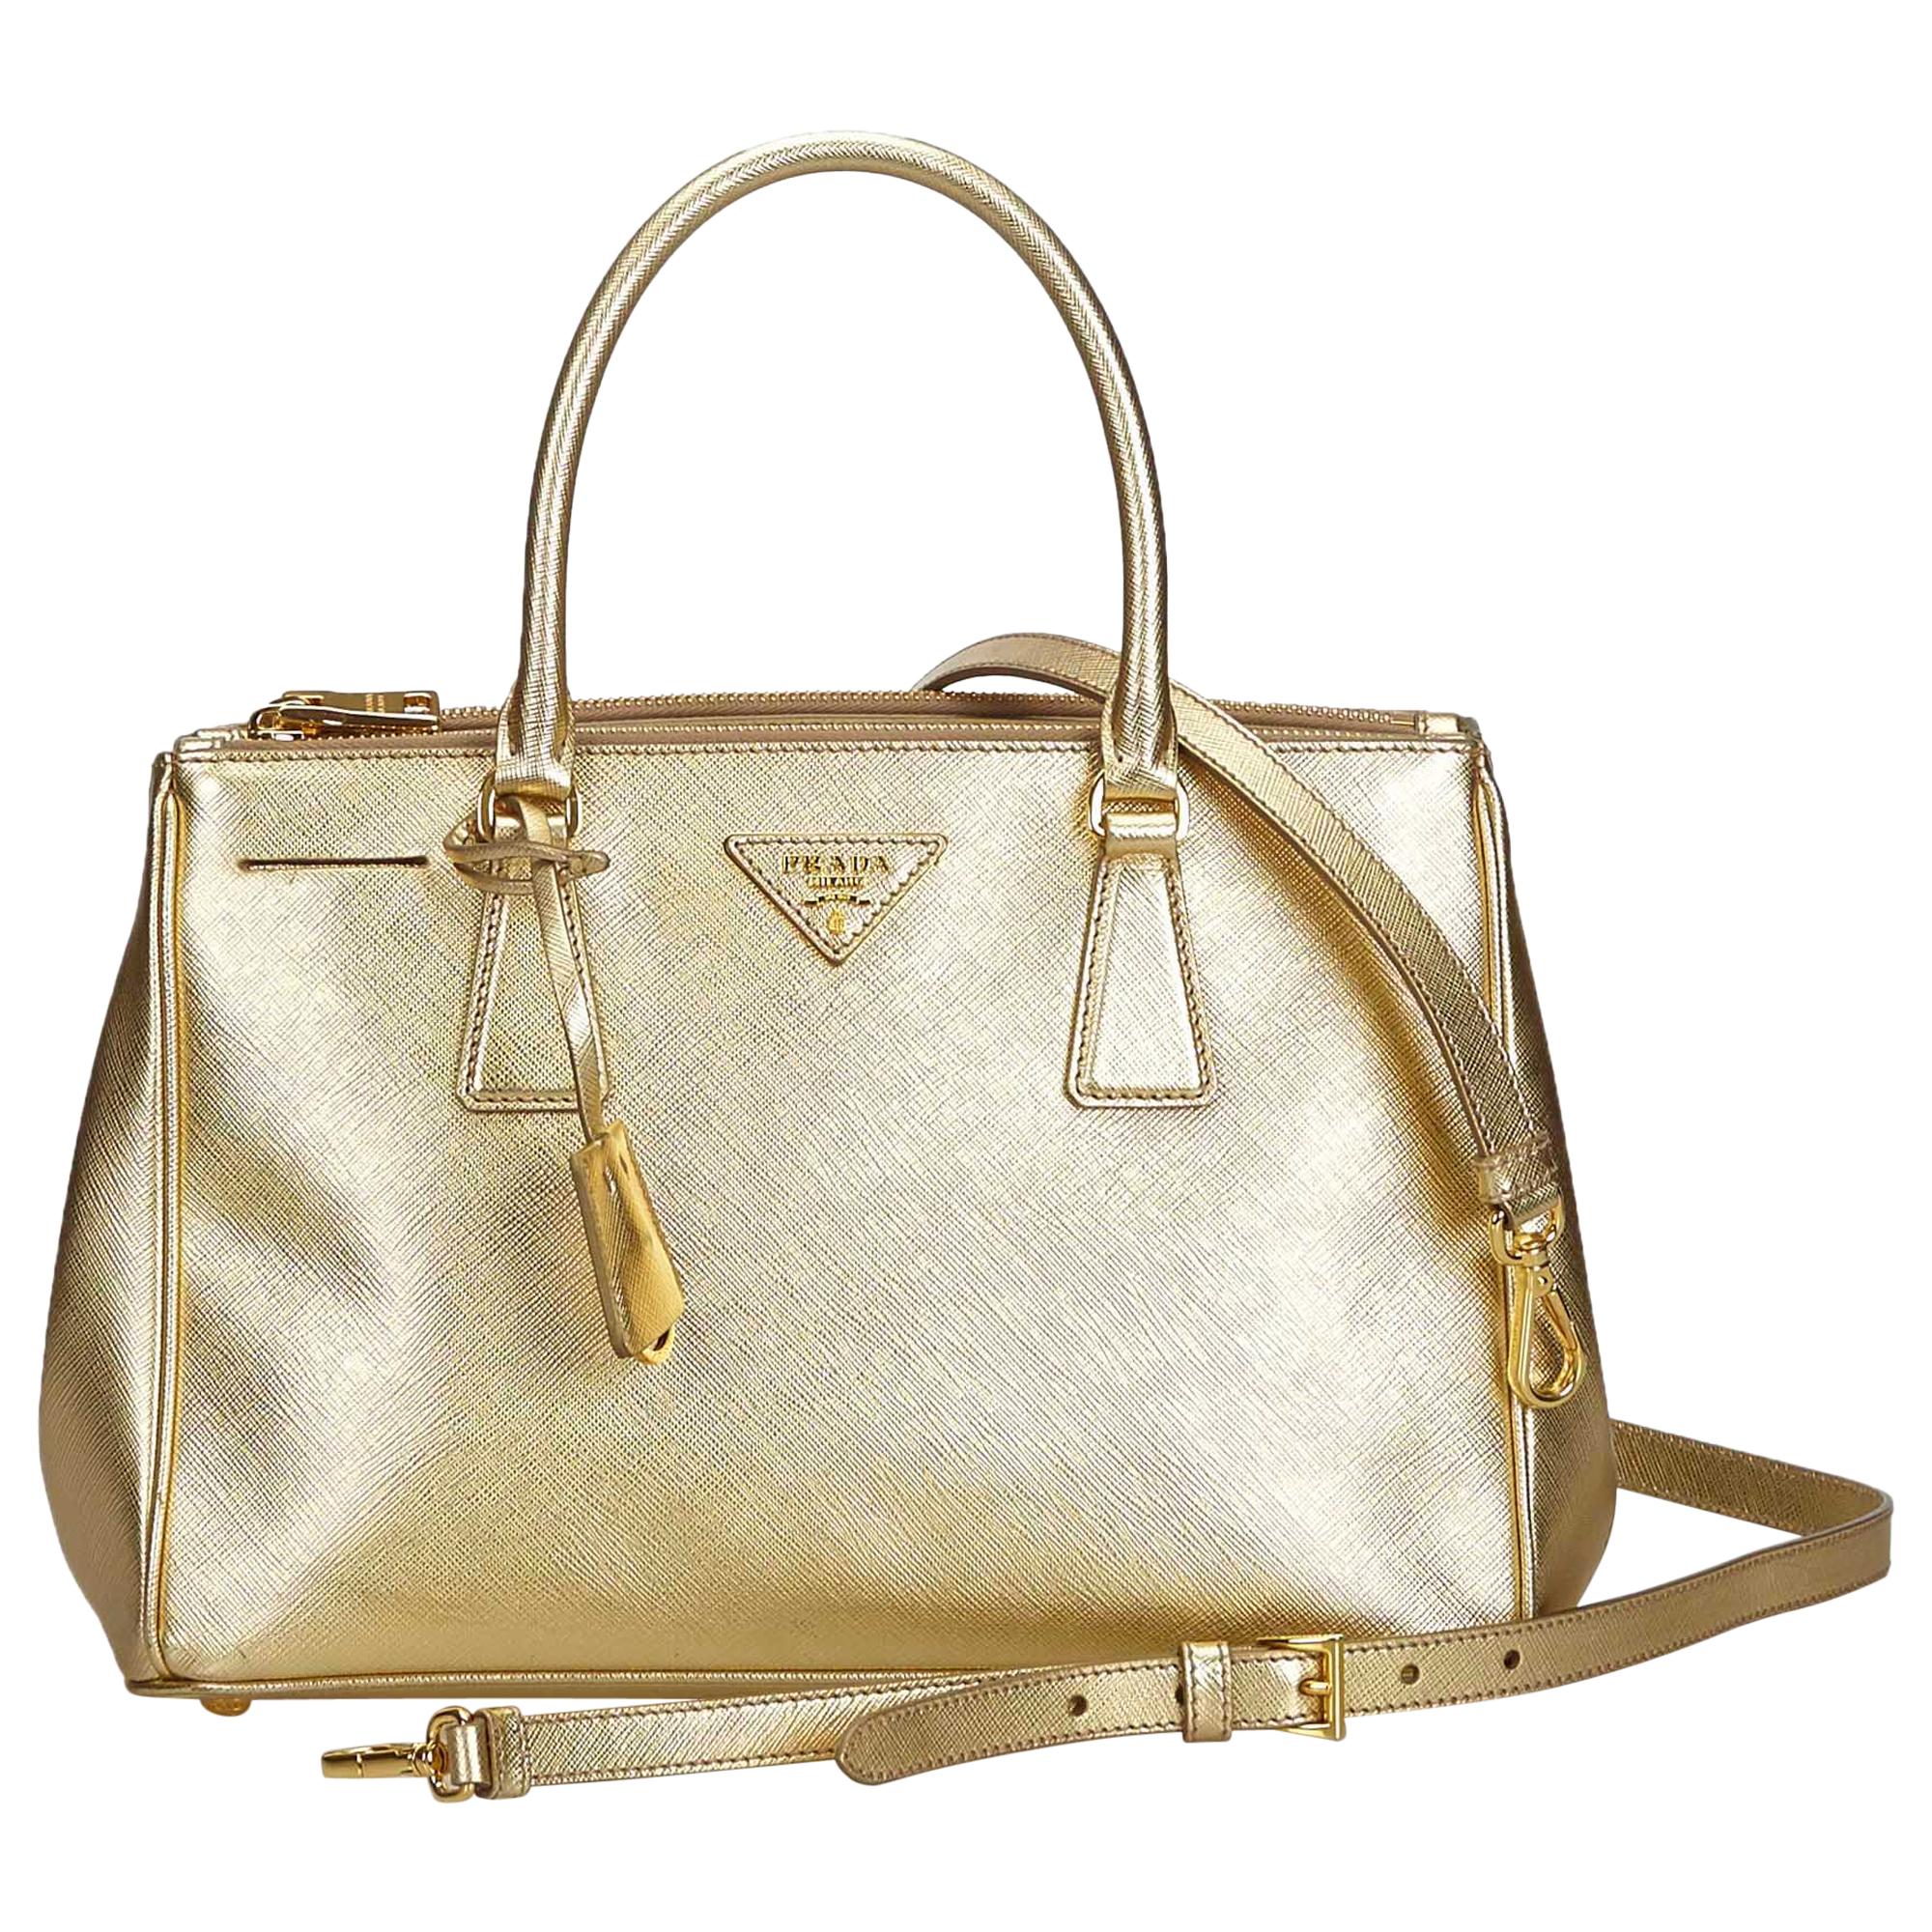 Prada Gold  Leather Saffiano Galleria Satchel Italy w/ Authenticity Card For Sale